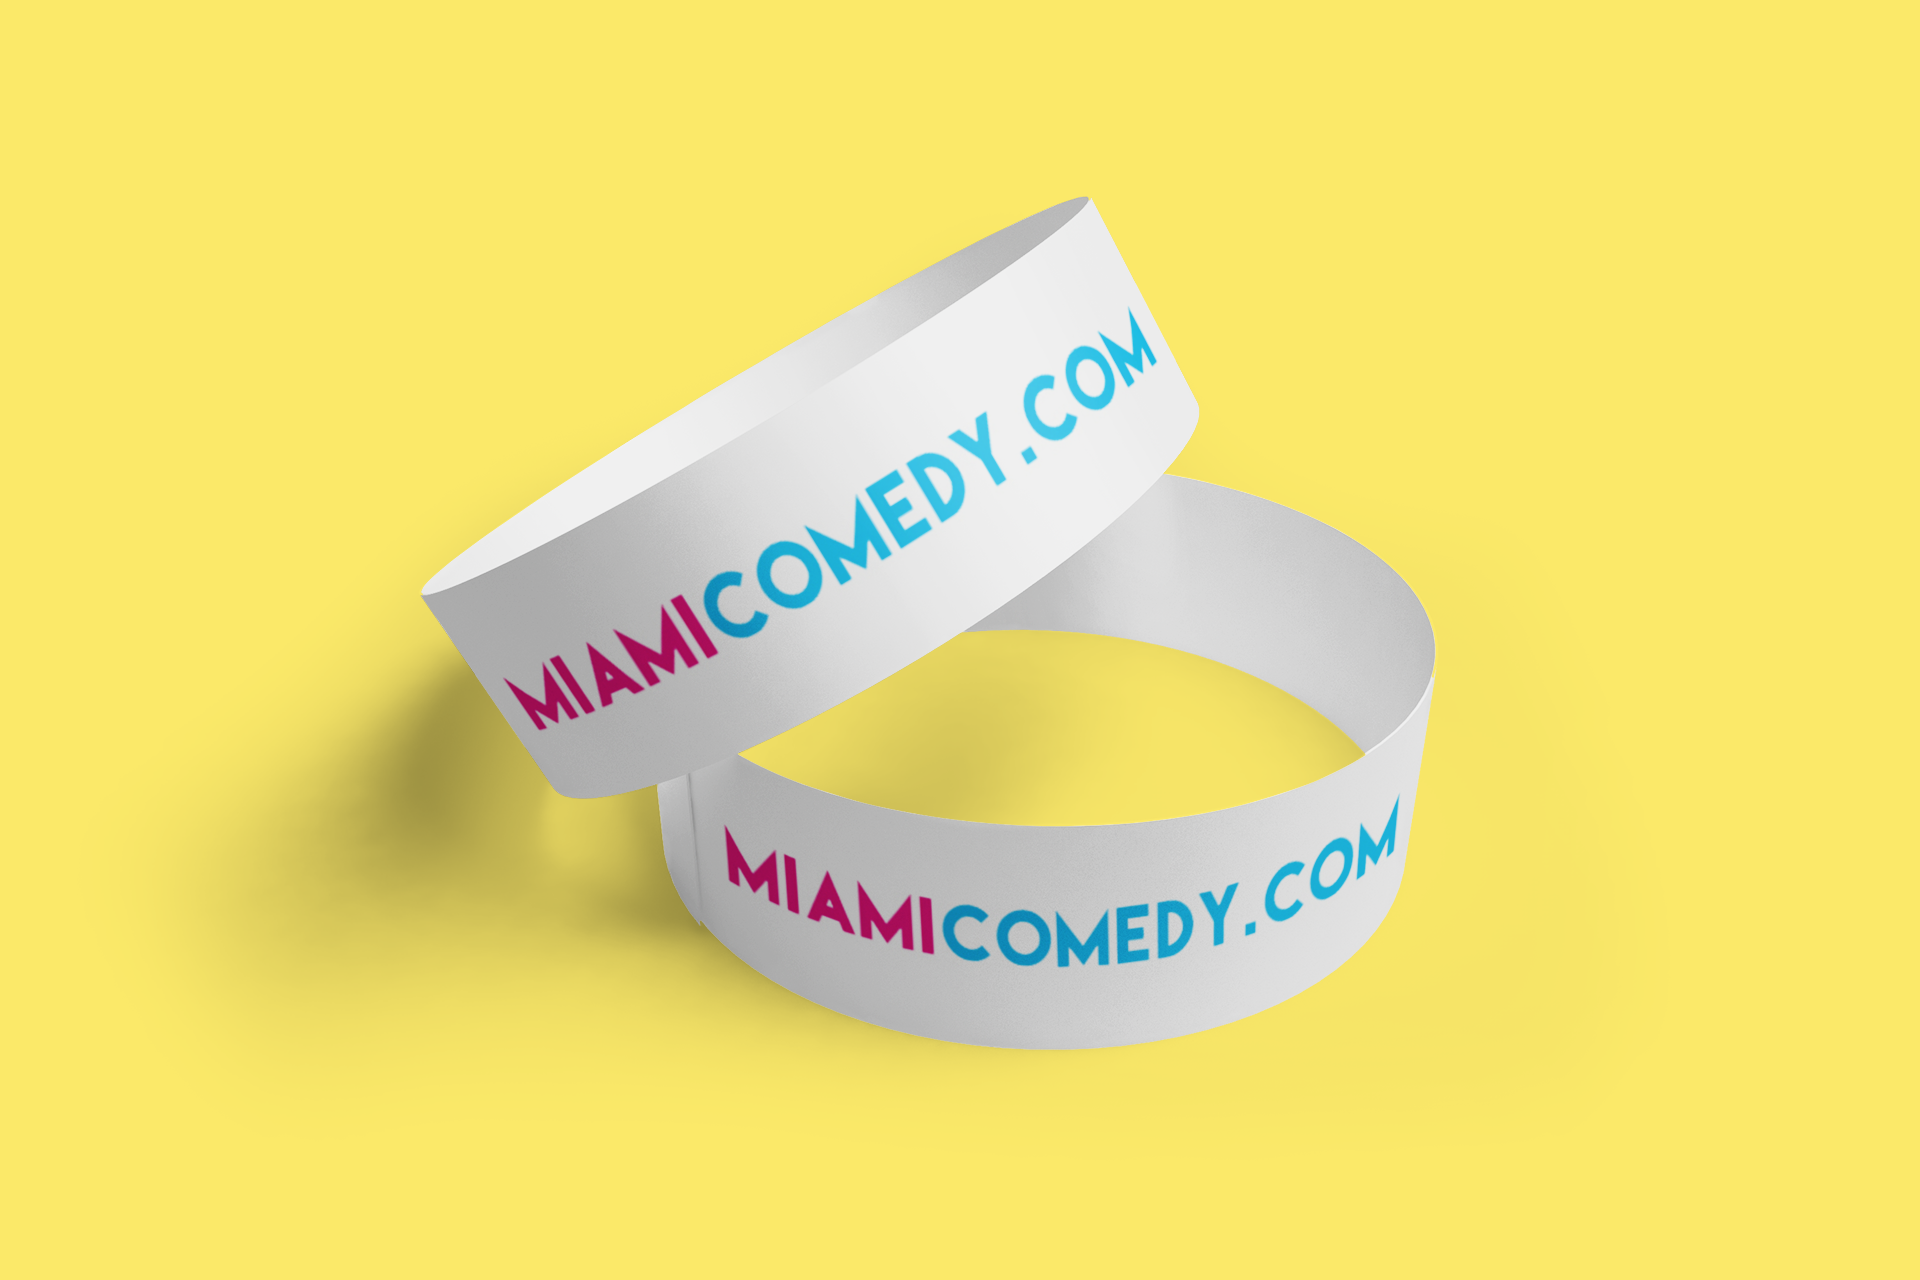 Miami Comedy Buy One Get One Free Drinks Wristbands